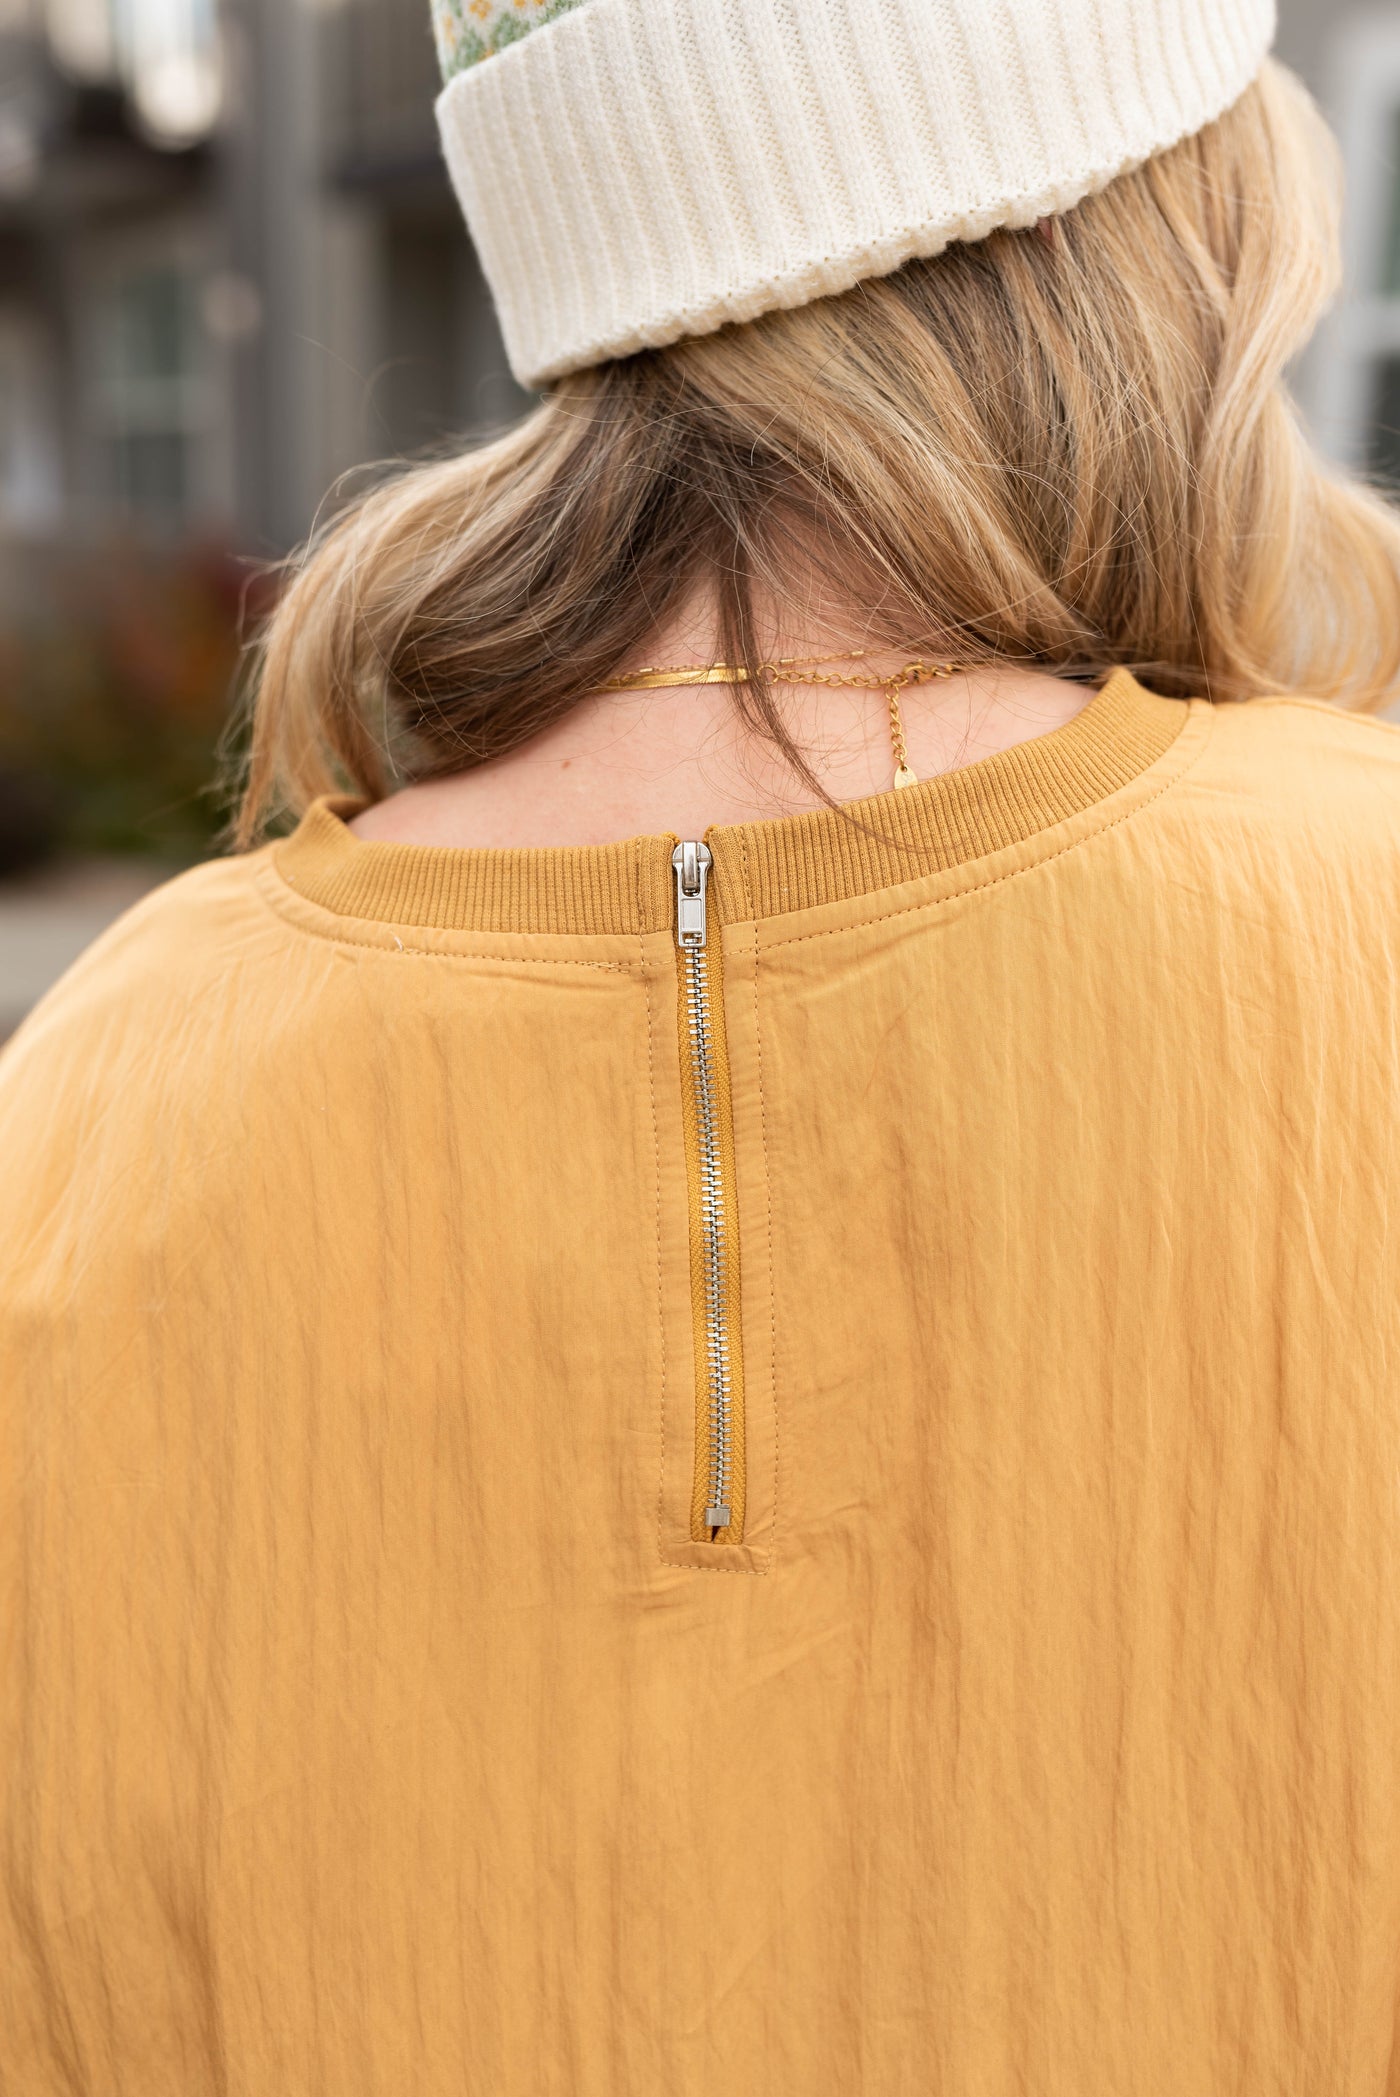 Back view of the mustard parachute blouse with a zipper